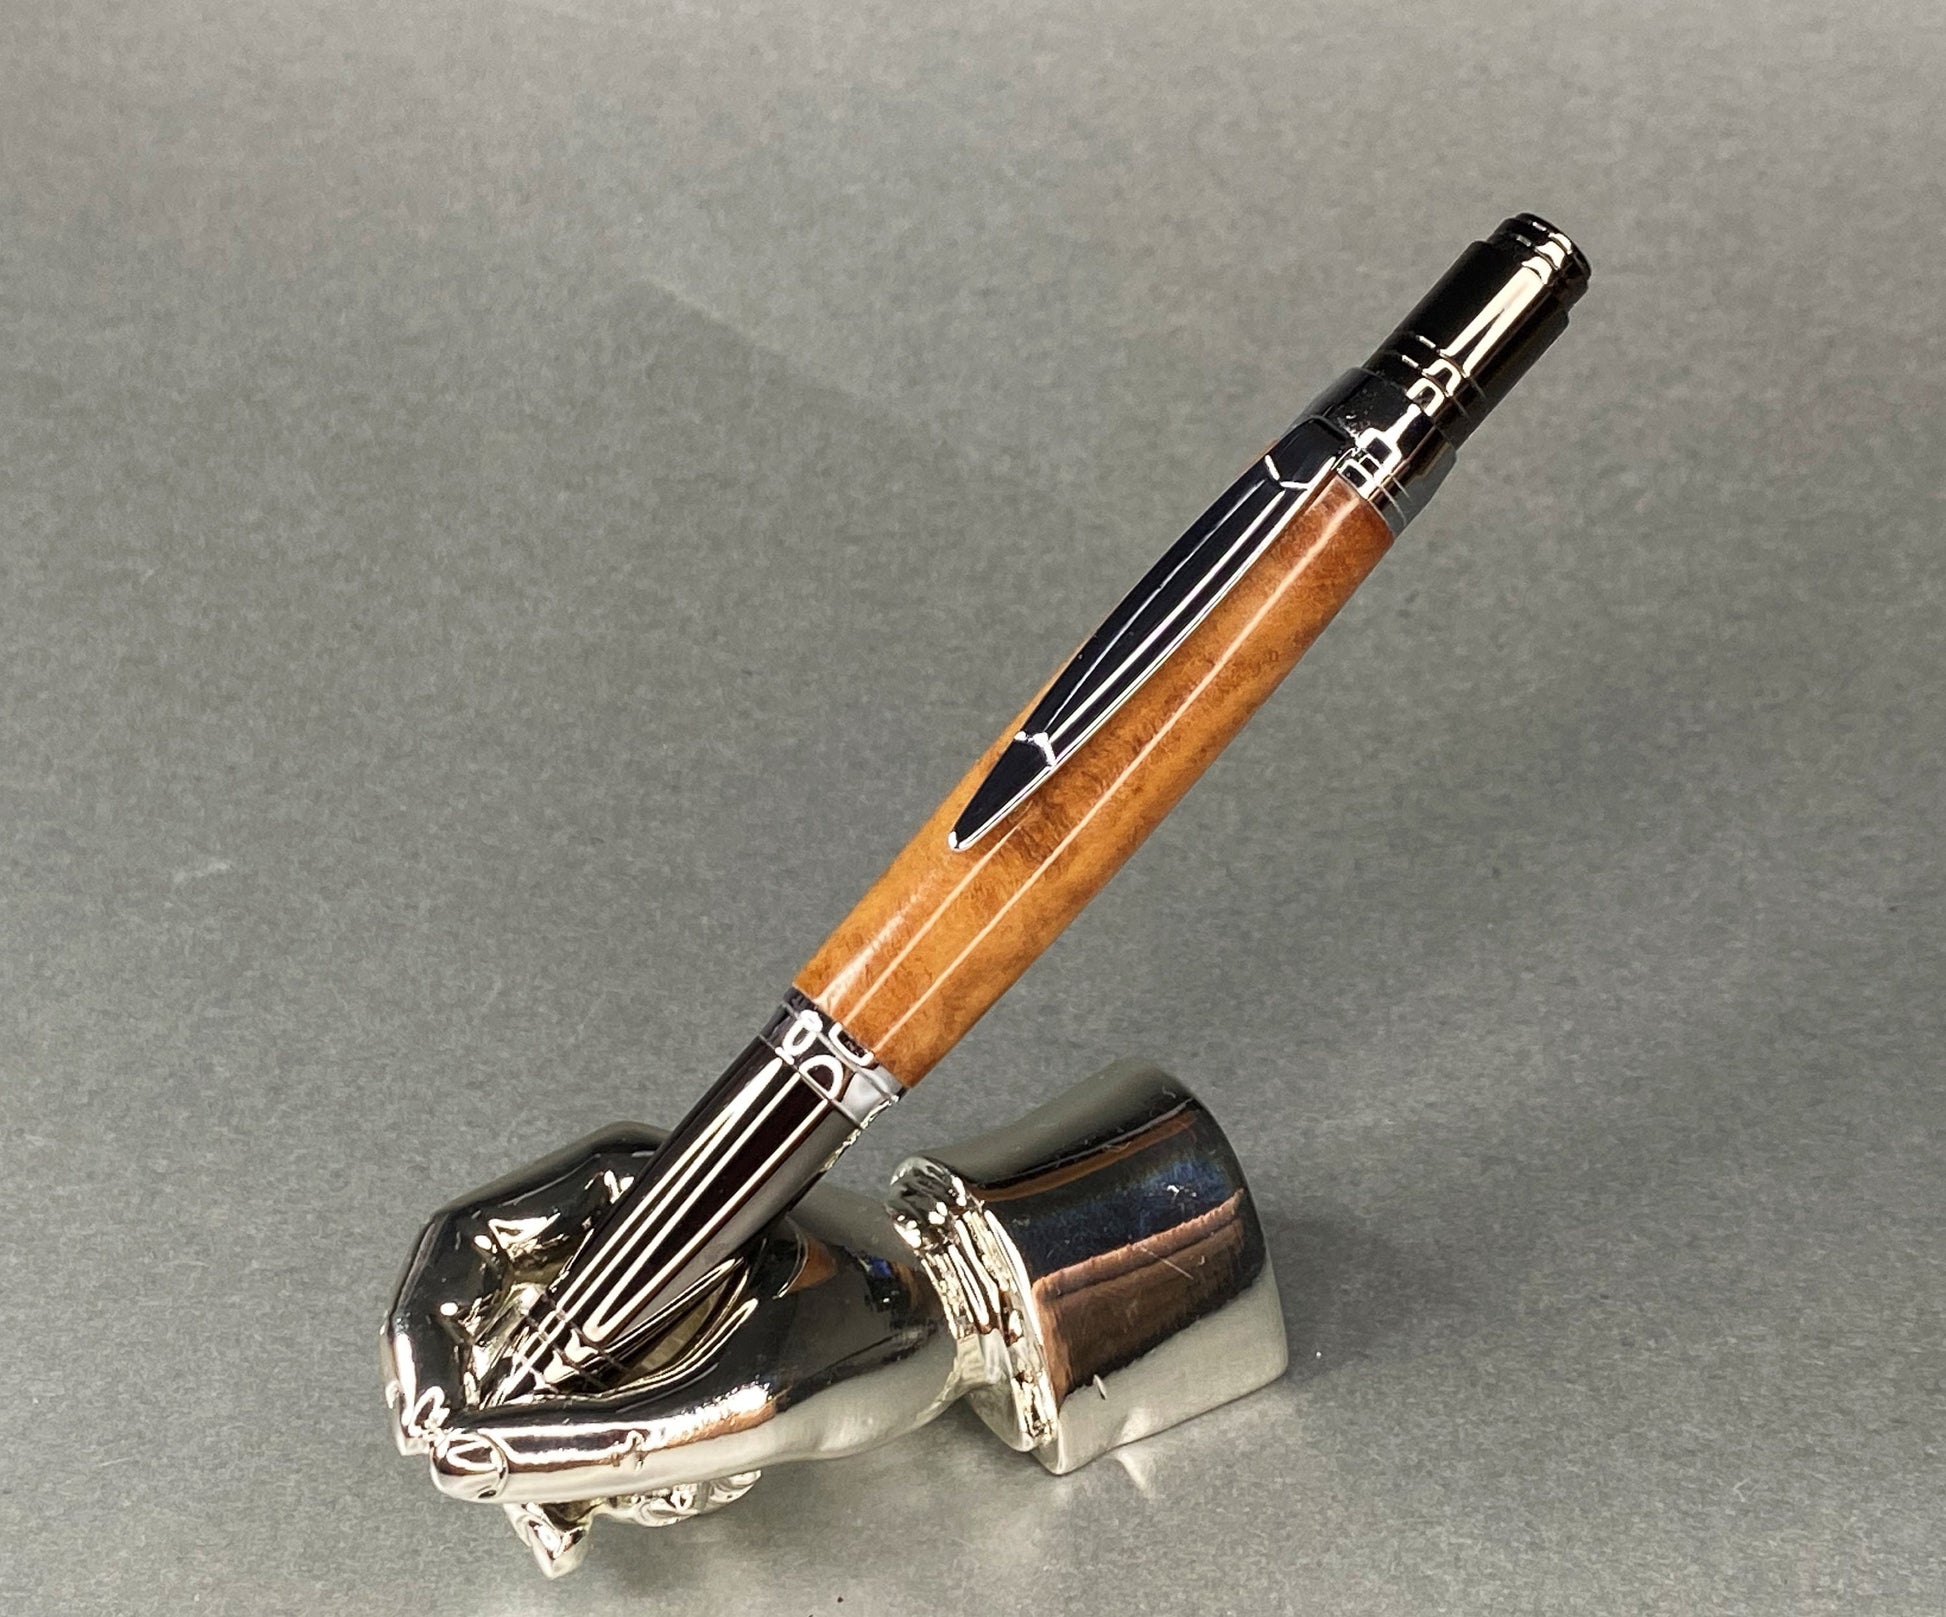 A right hand shaped metal base holding a handturned Jarrah burr Wood pen as you would hold it to write with.